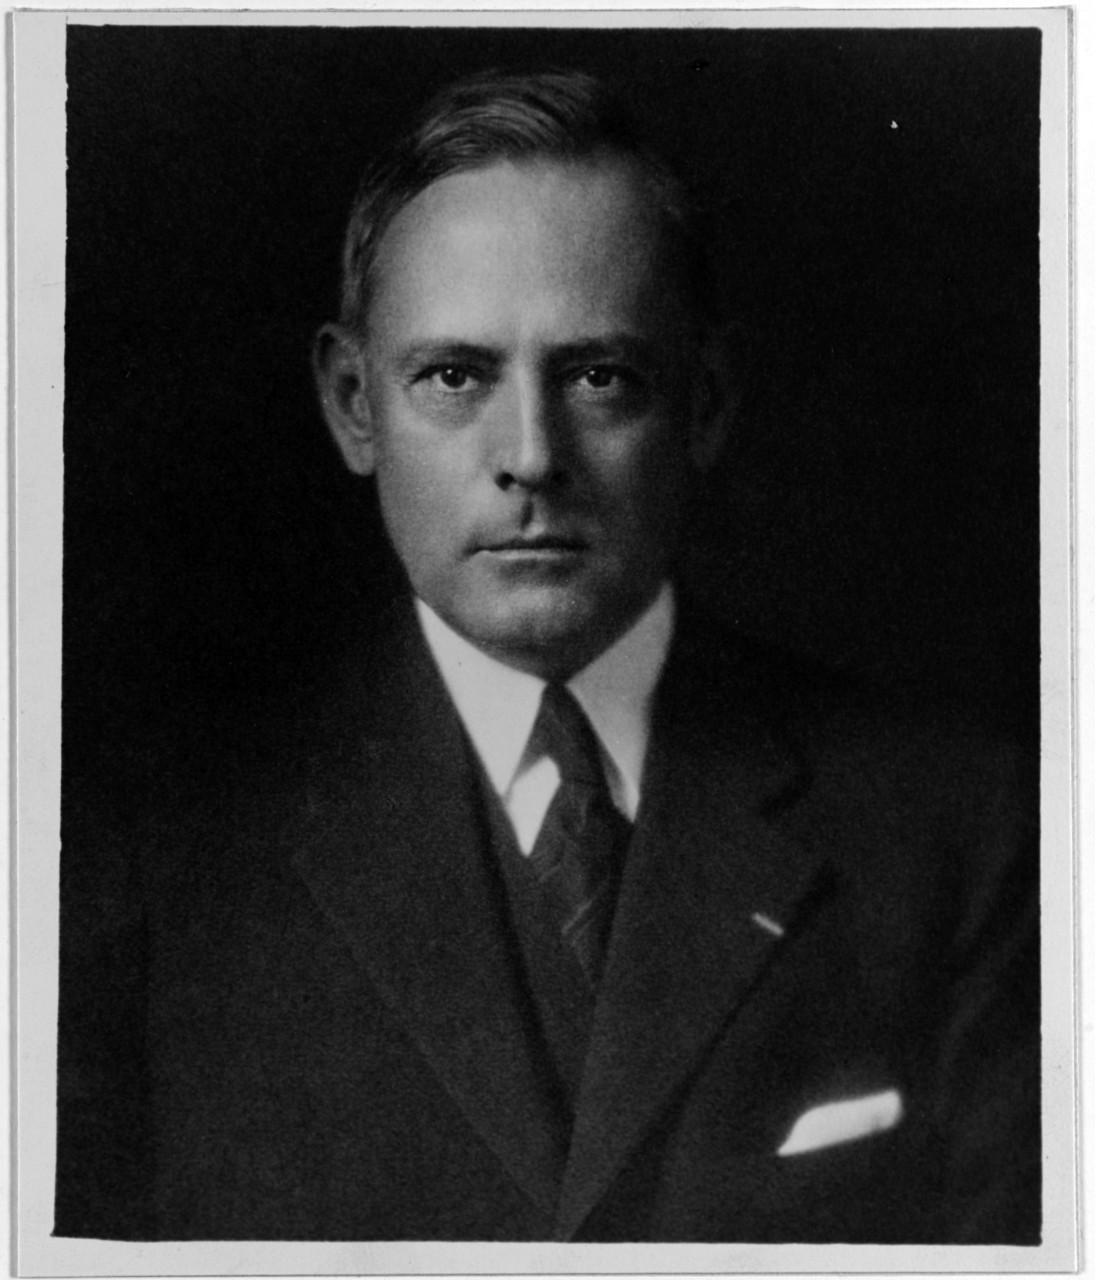 Assistant Secretary of the Navy Ernest L. Jahncke